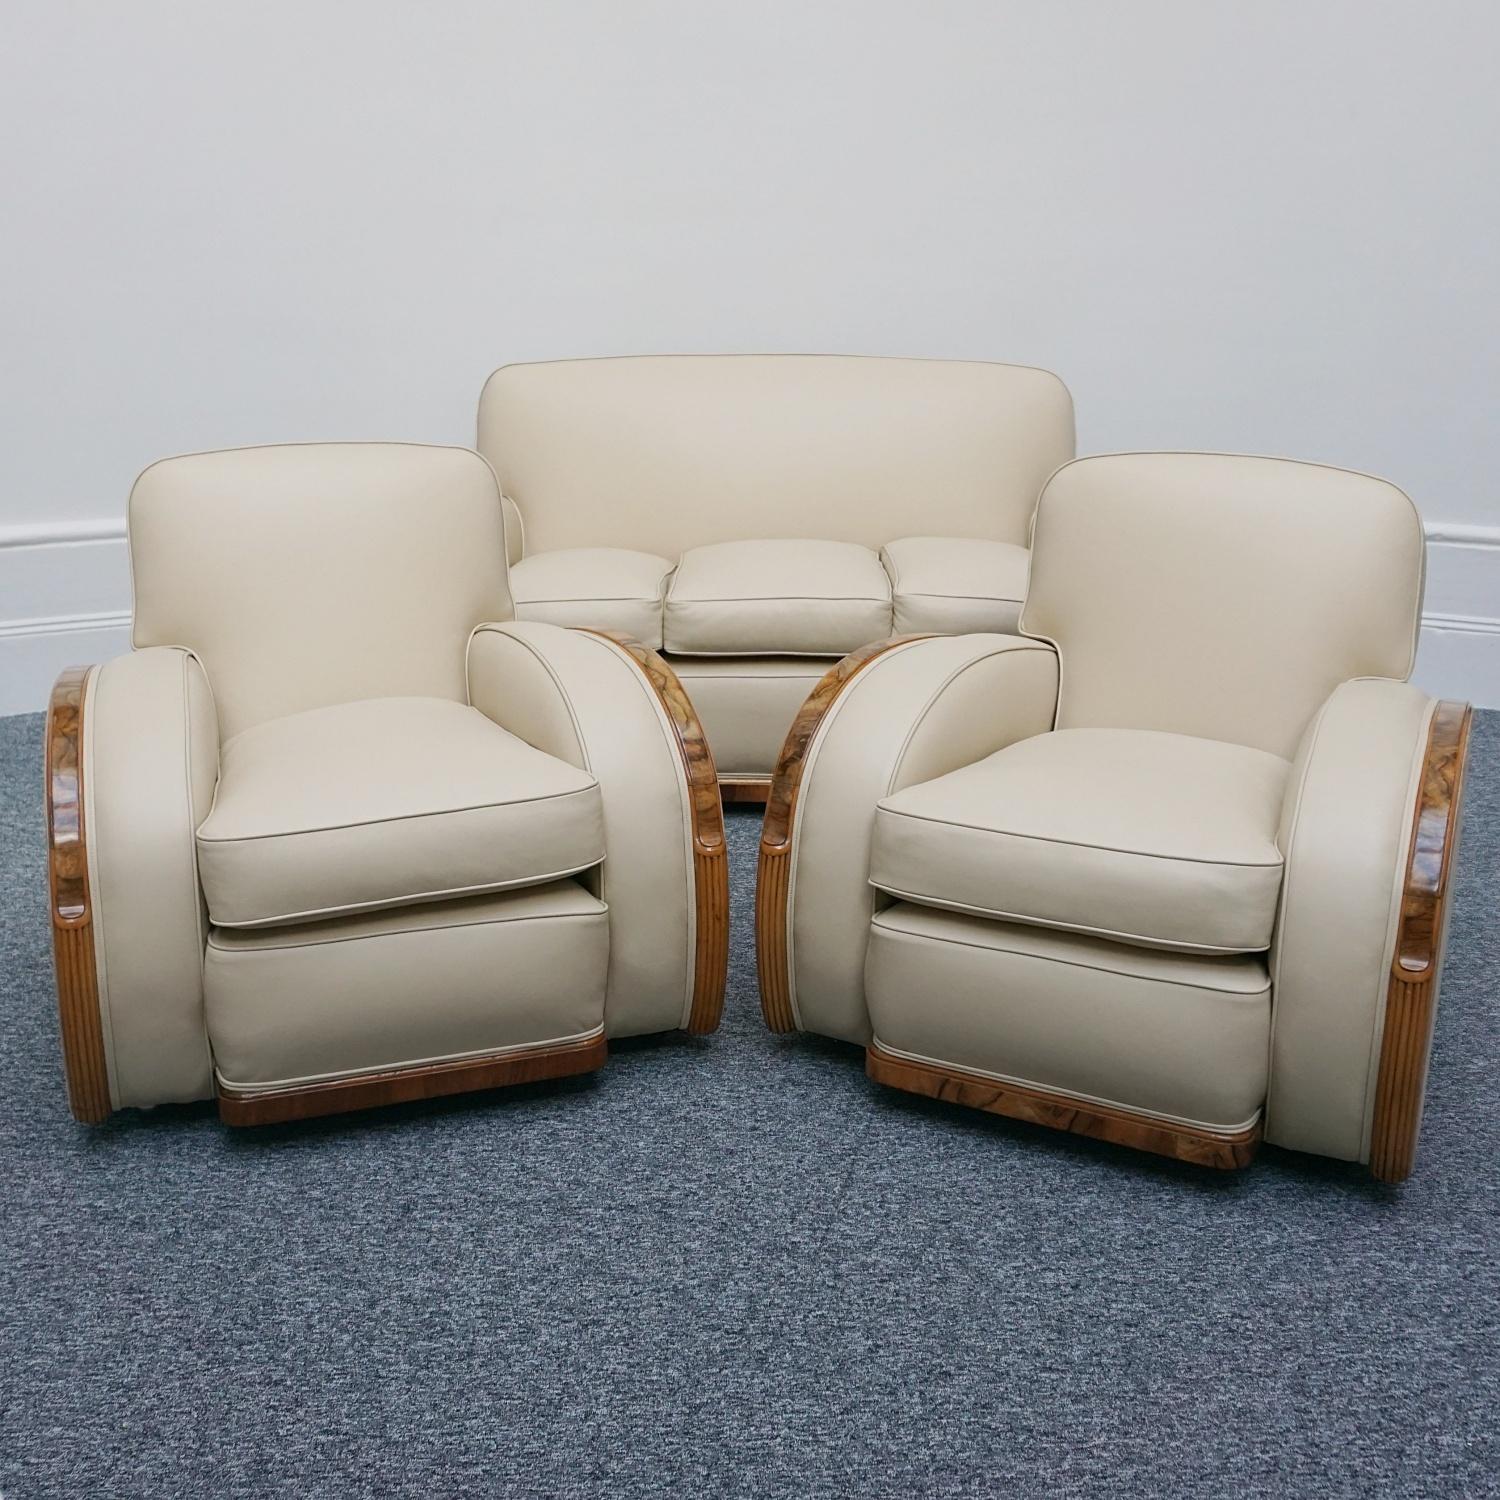 English An Art Deco Three Piece Lounge Suite by Heal's of London Circa 1935 